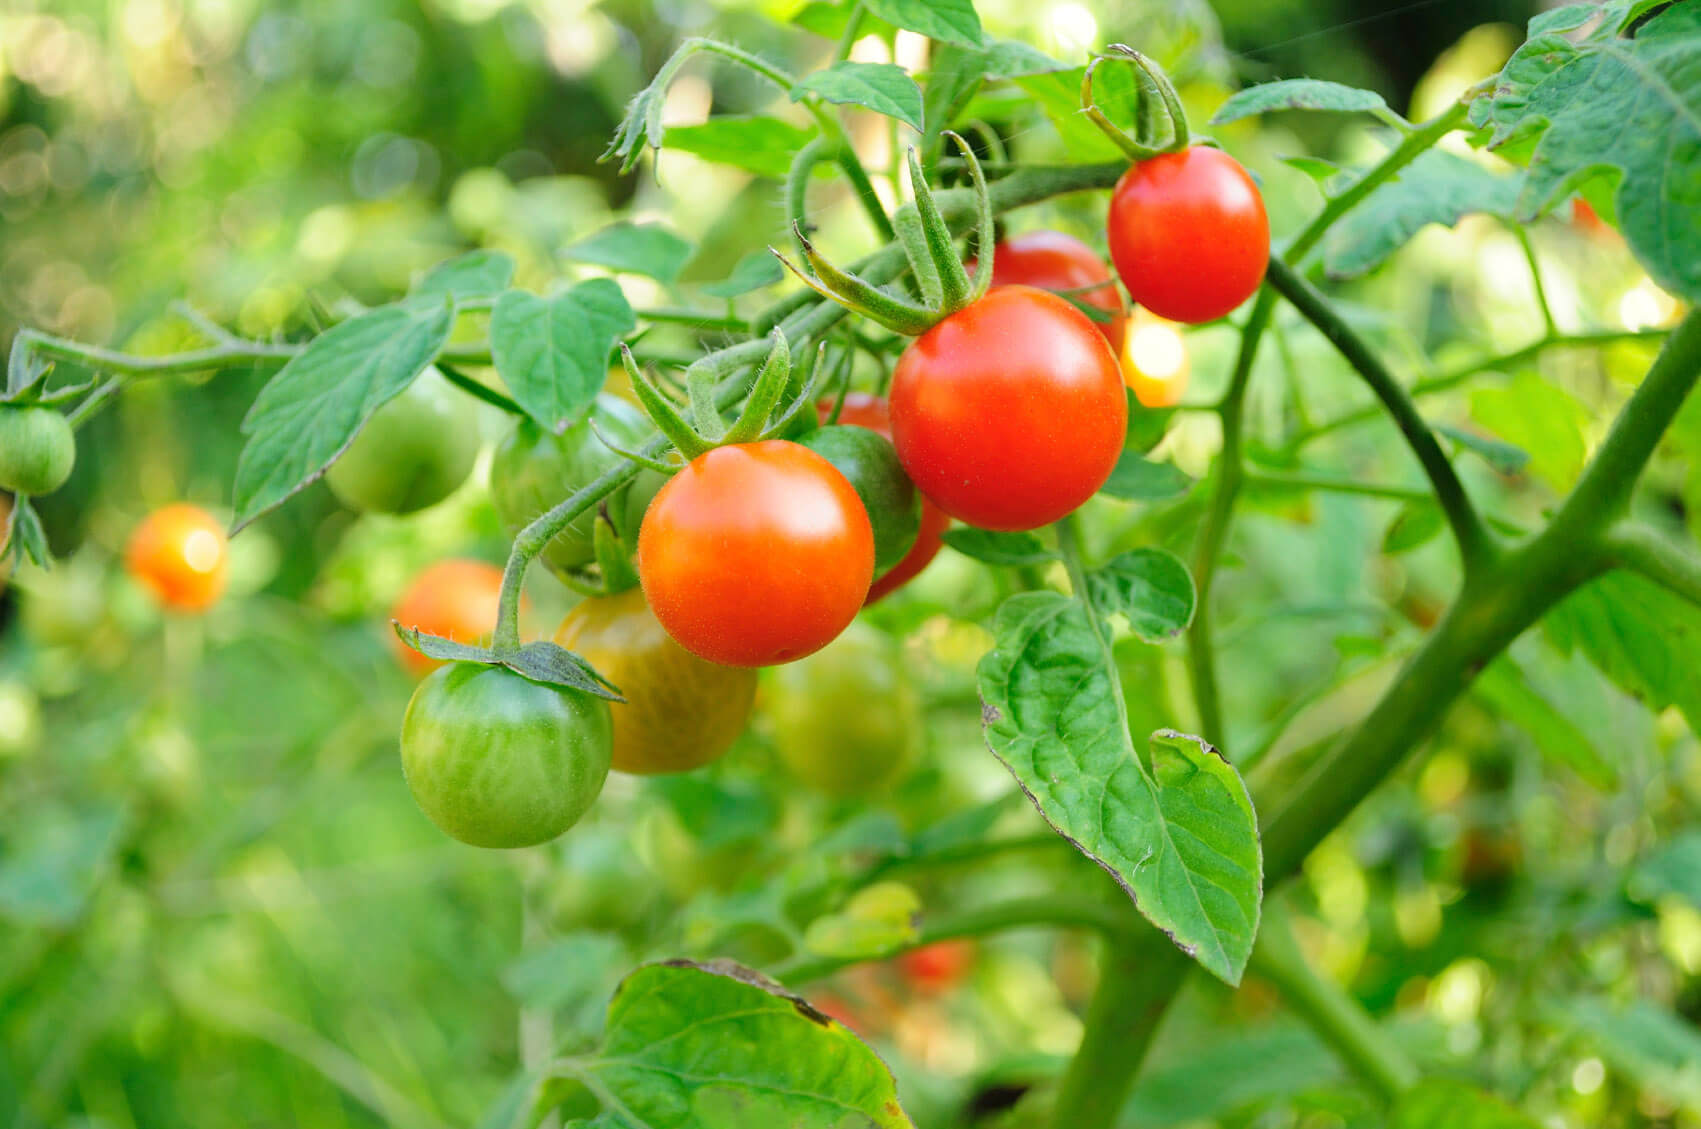 How To Grow Tomatoes - Garden Experiments